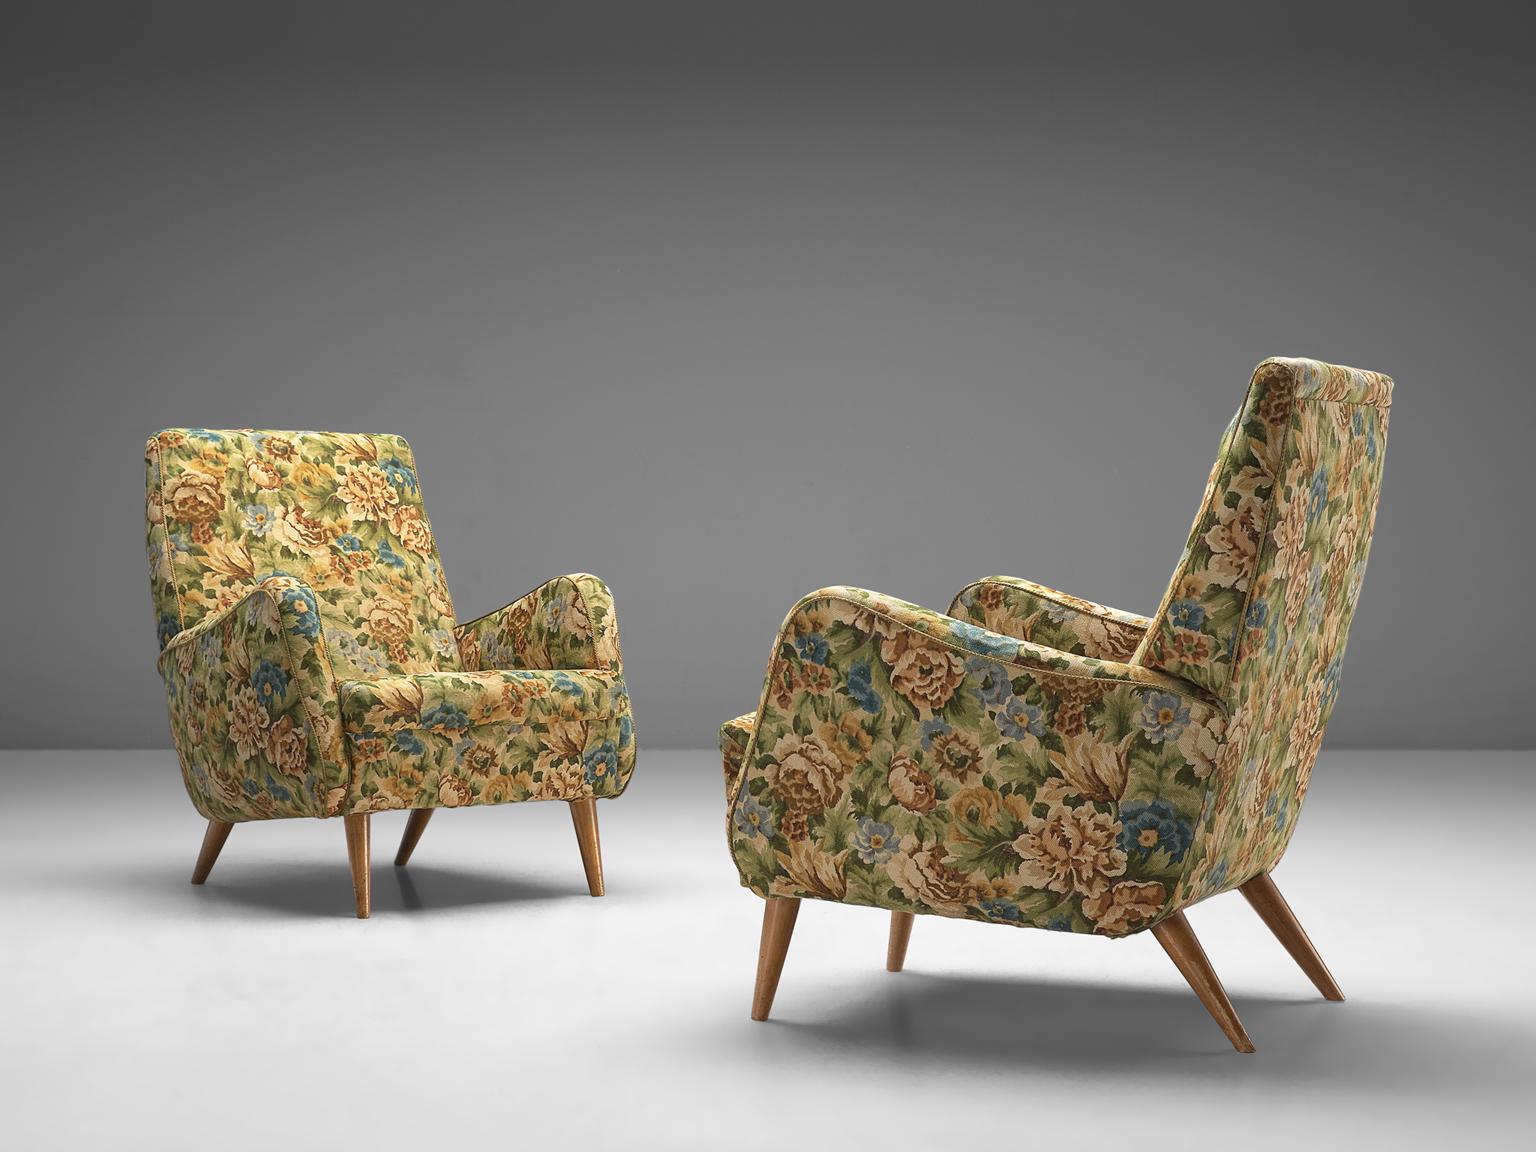 Set of 2 highback chairs, fabric and beech, Italy, 1950s

This set of chairs is an iconic example of Italian design from the 1950s. The design is on the one hand simplistic, with elegant, subtle lines. On the other hand the set has a certain